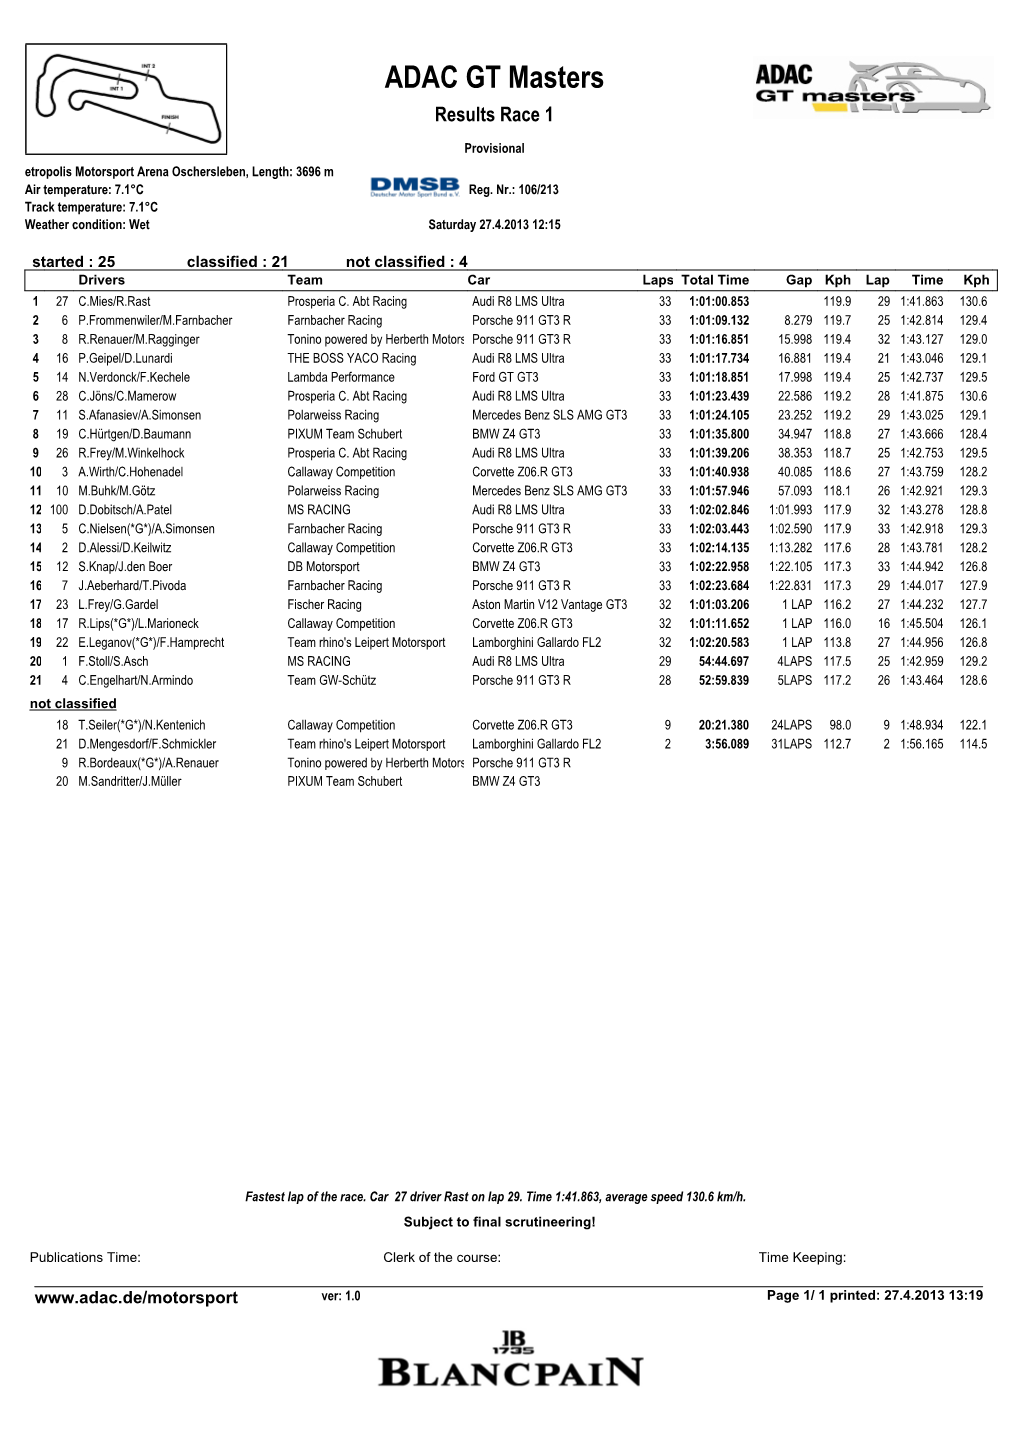 ADAC GT Masters Results Race 1